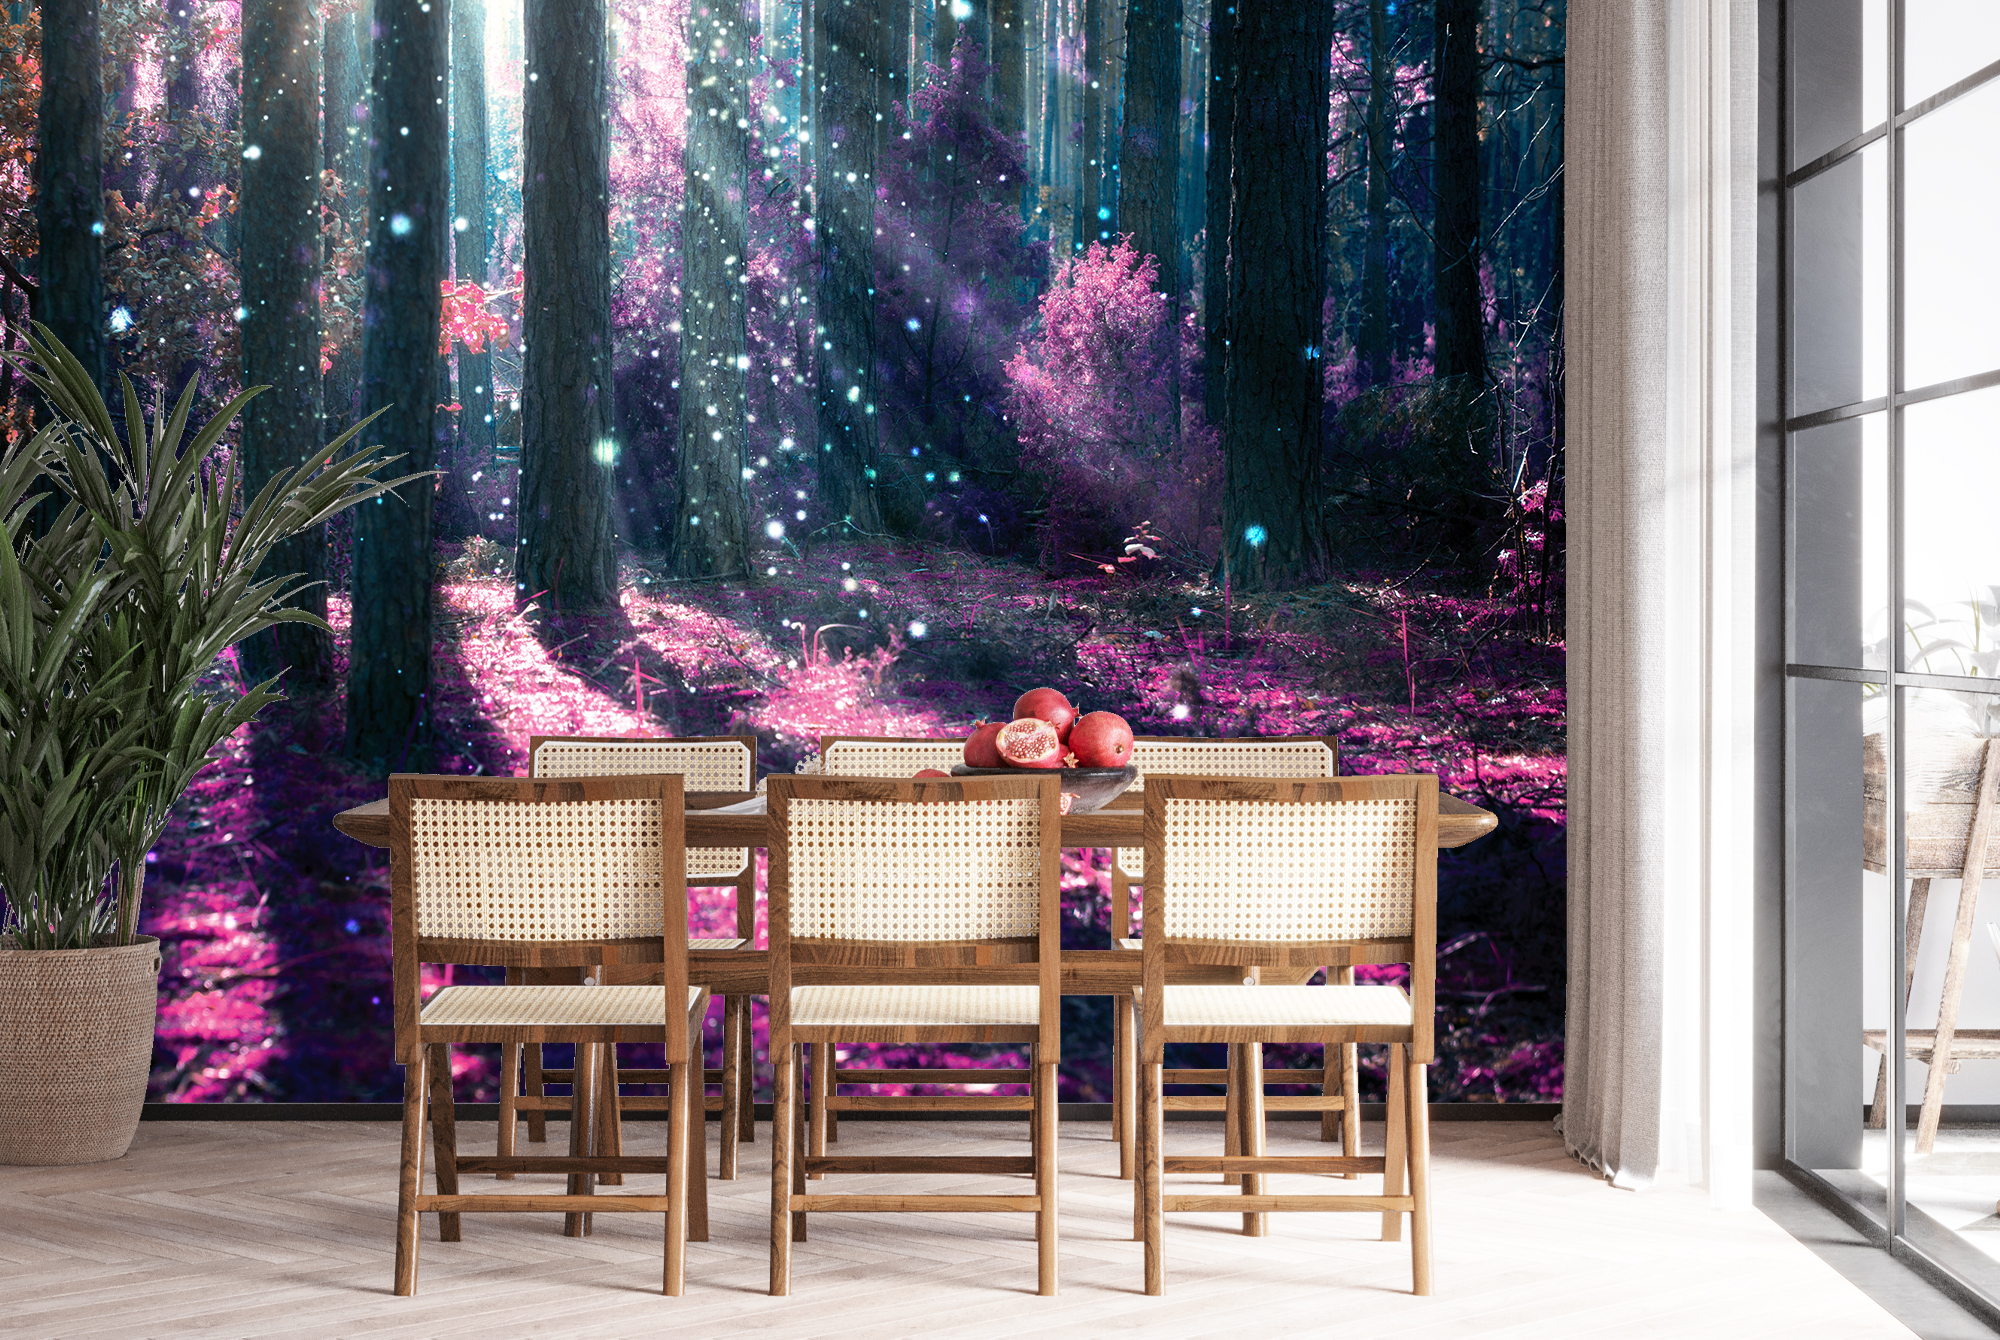 Details About Enchanted Forest Wall Mural Purple Tree Photo Wallpaper Girls Bedroom Home Decor